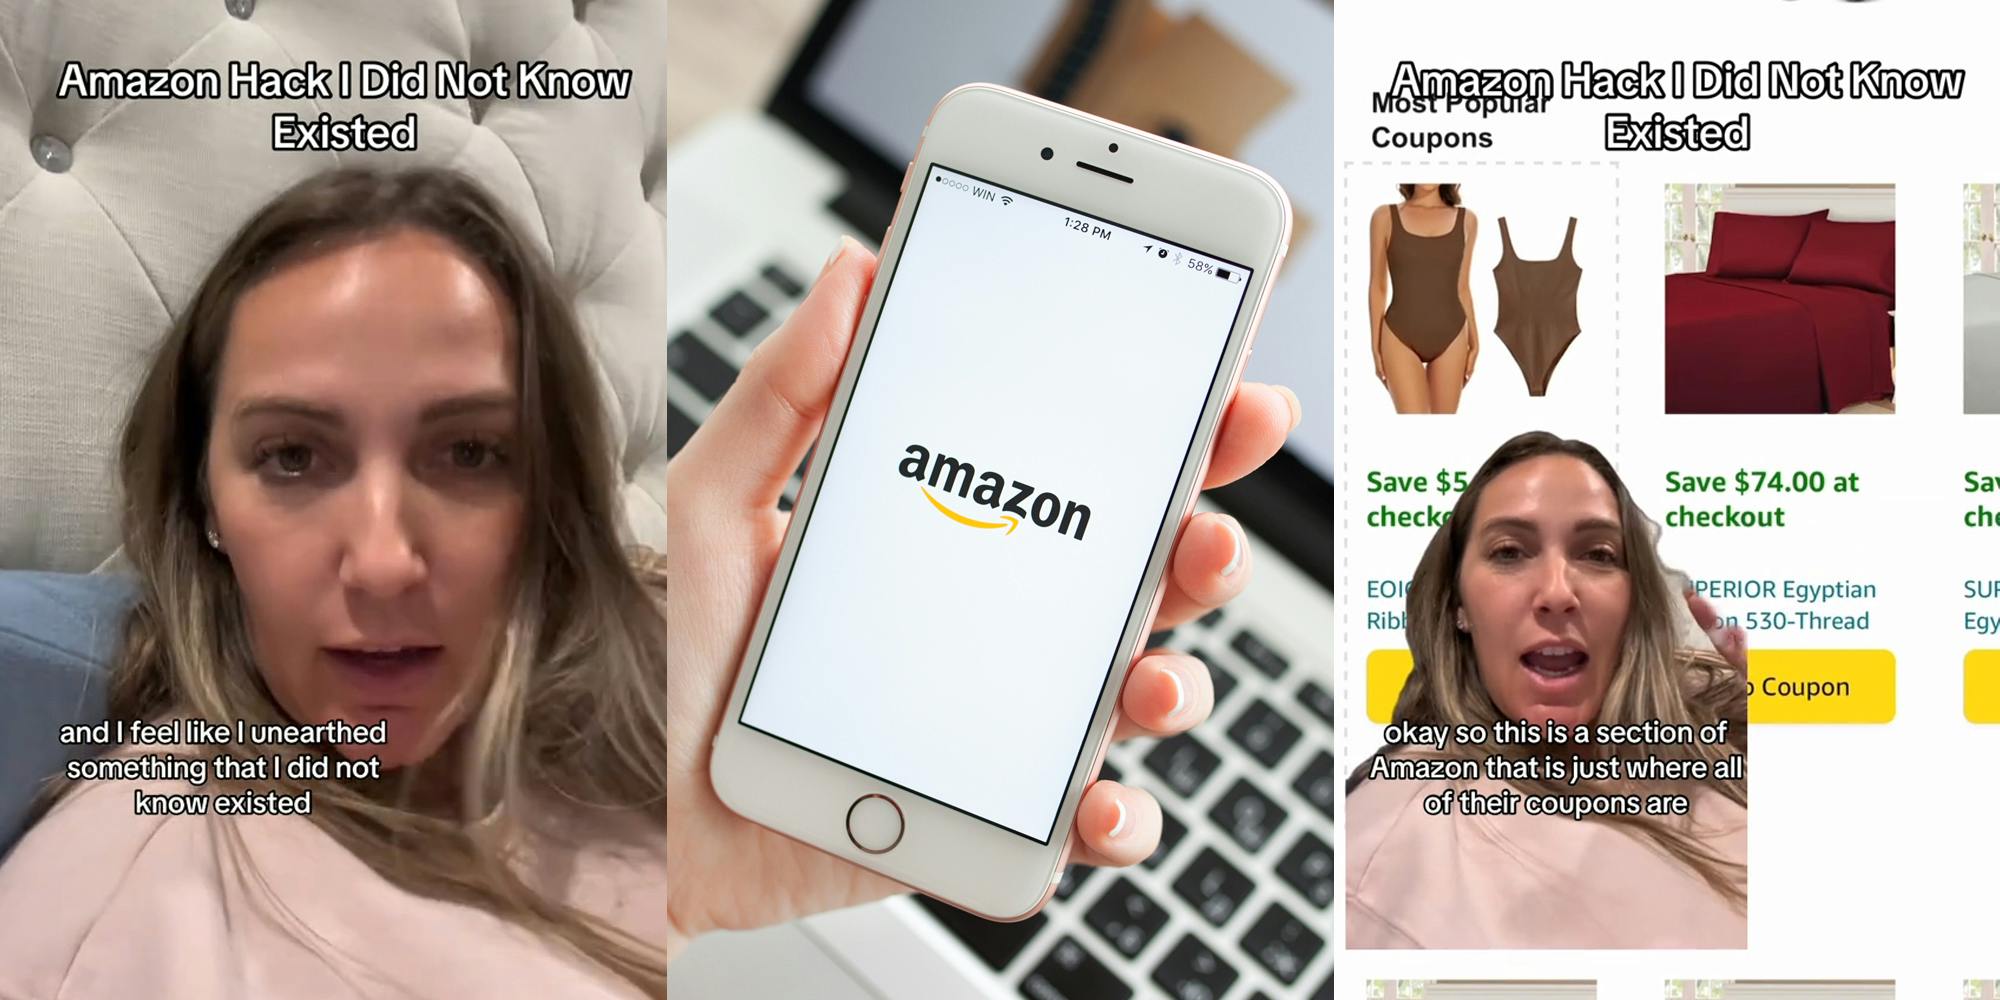 Amazon shopper speaking with caption "Amazon Hack I Did Not Know Existed and I feel like I unearthed something I did not know existed" (l) Amazon app open on phone in hand over laptop (c) Amazon shopper greenscreen TikTok speaking over Amazon with caption "Amazon Hack I Did Not Know Existed okay so this is a section of Amazon that is just where all of their coupons are" (r)